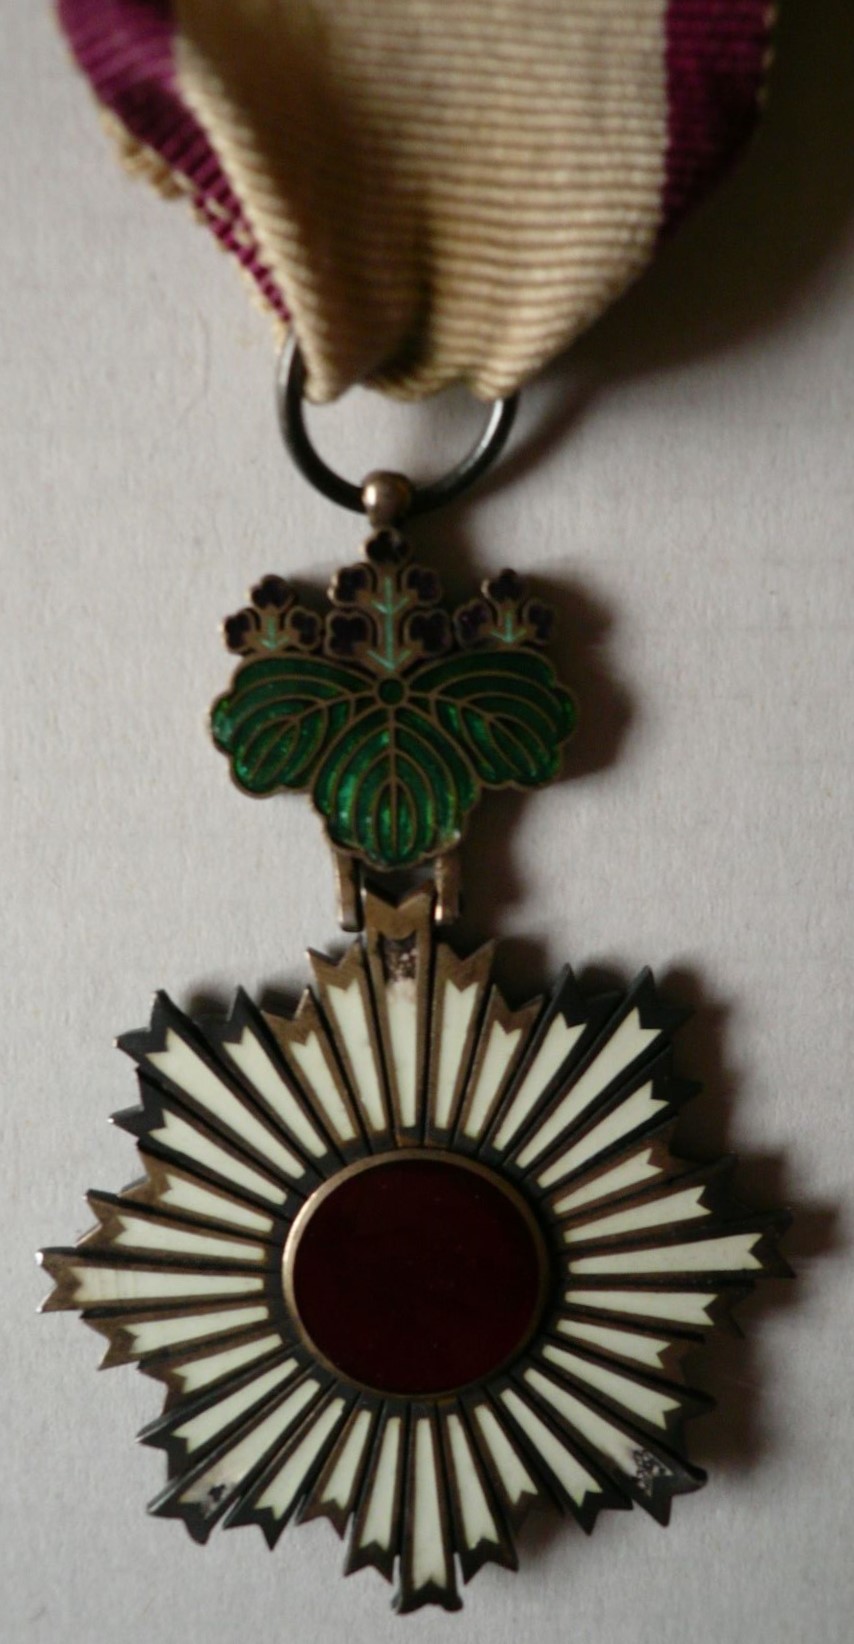 5th class Rising Sun order awarded to German Engineer G.A. Greeven in 1878.jpg